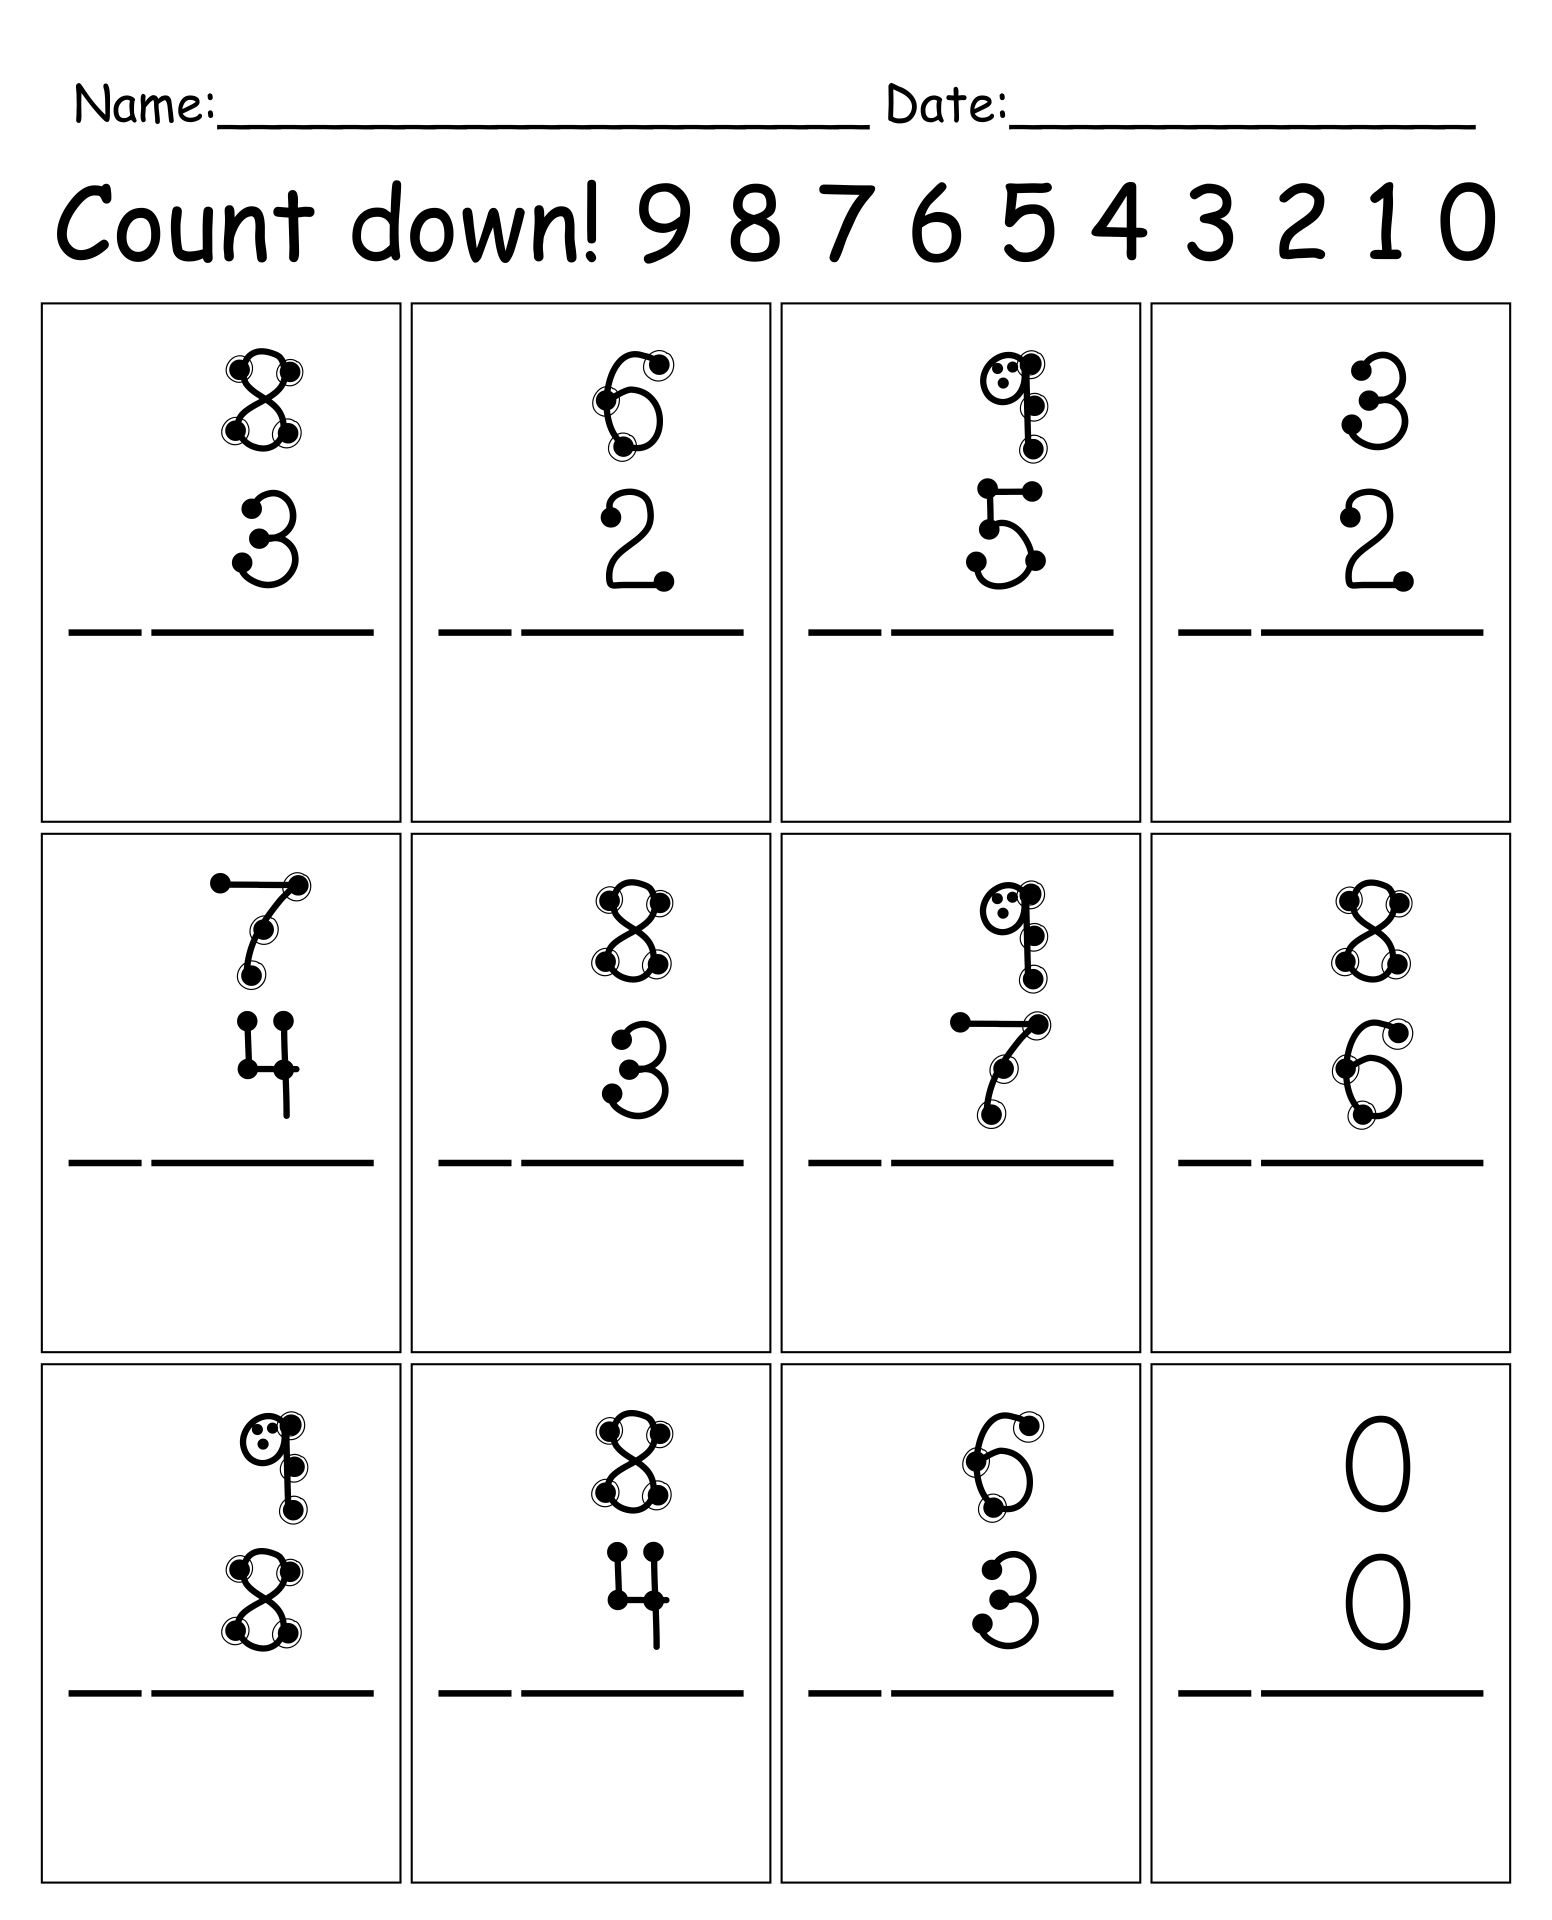 touch-math-addition-and-subtraction-worksheets